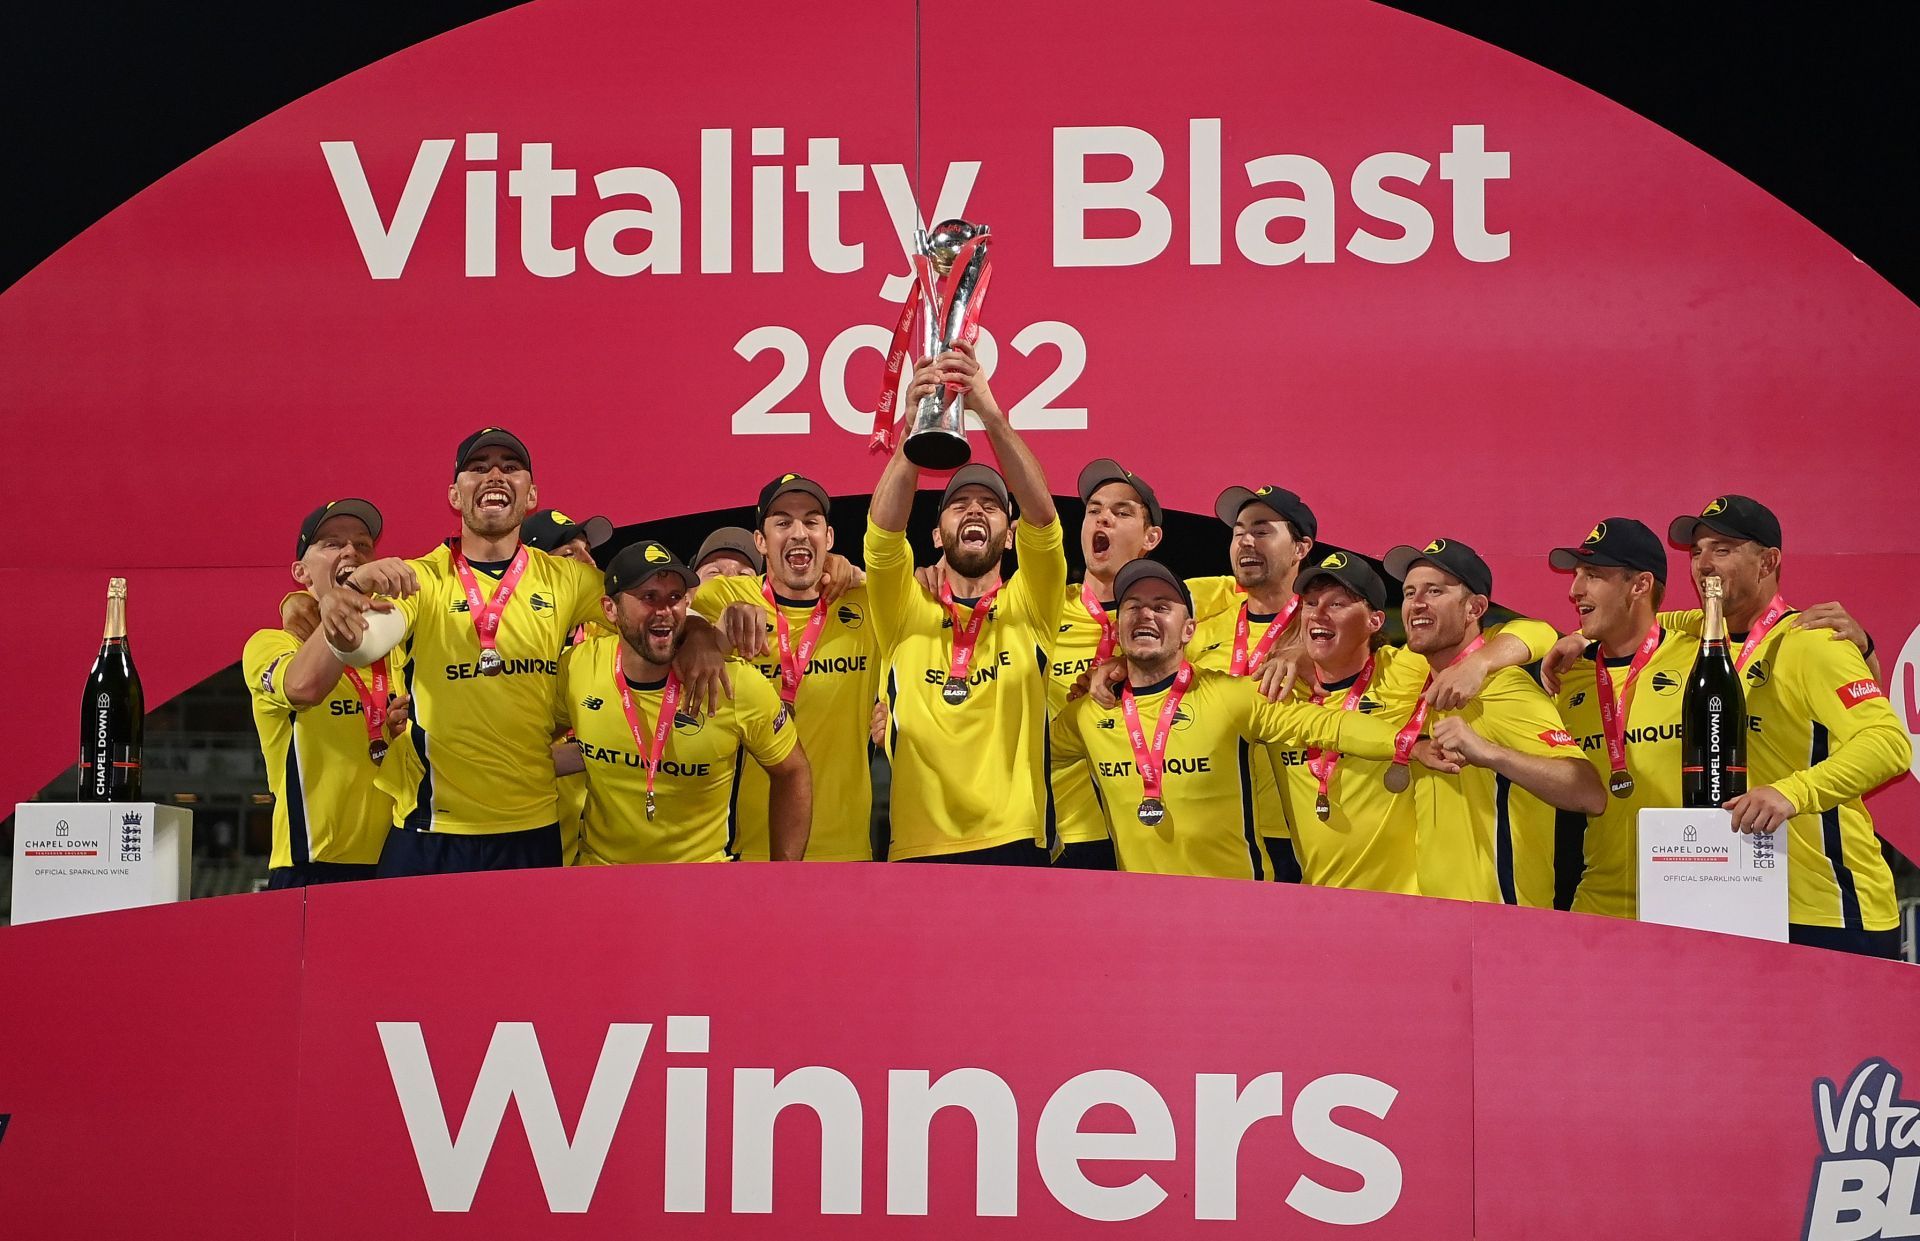 The Vitality Blast began in 2003 as the Twenty20 Cup. Pic: Getty Images